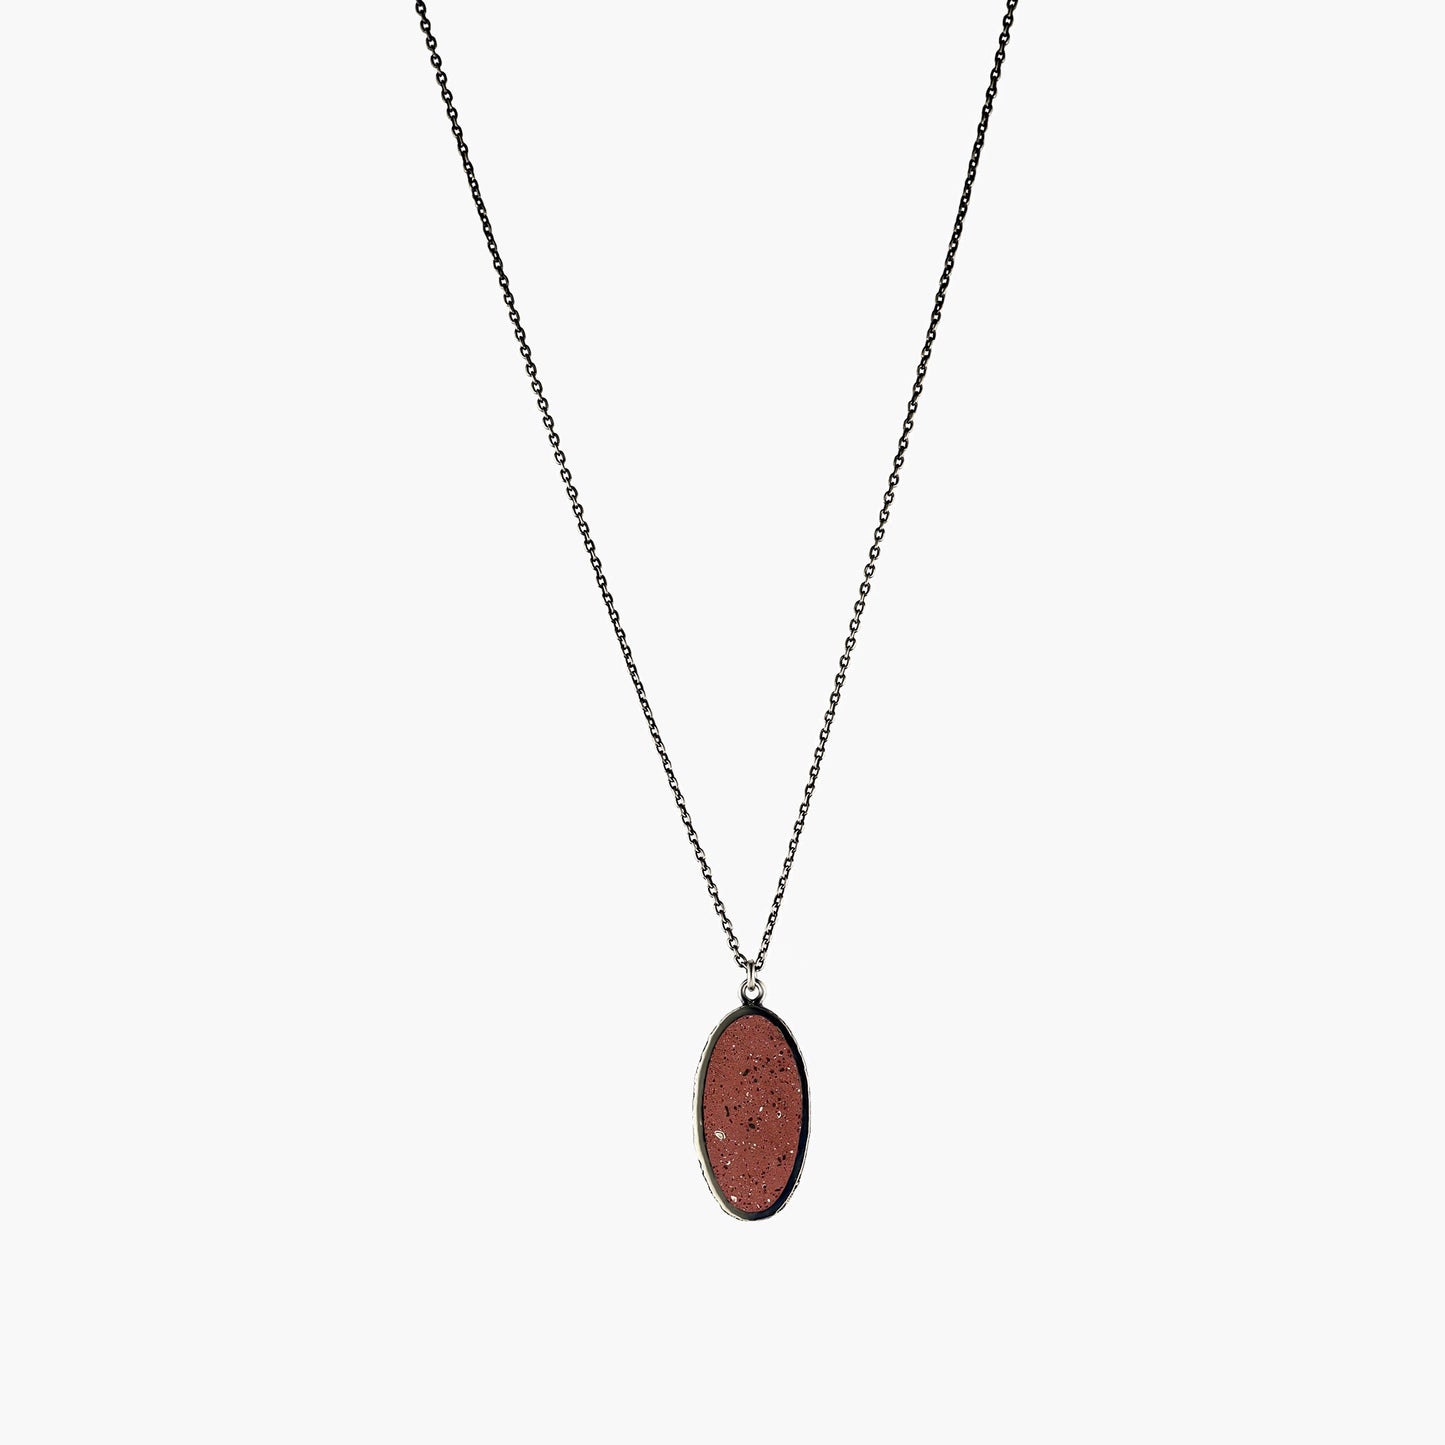 Lupin necklace